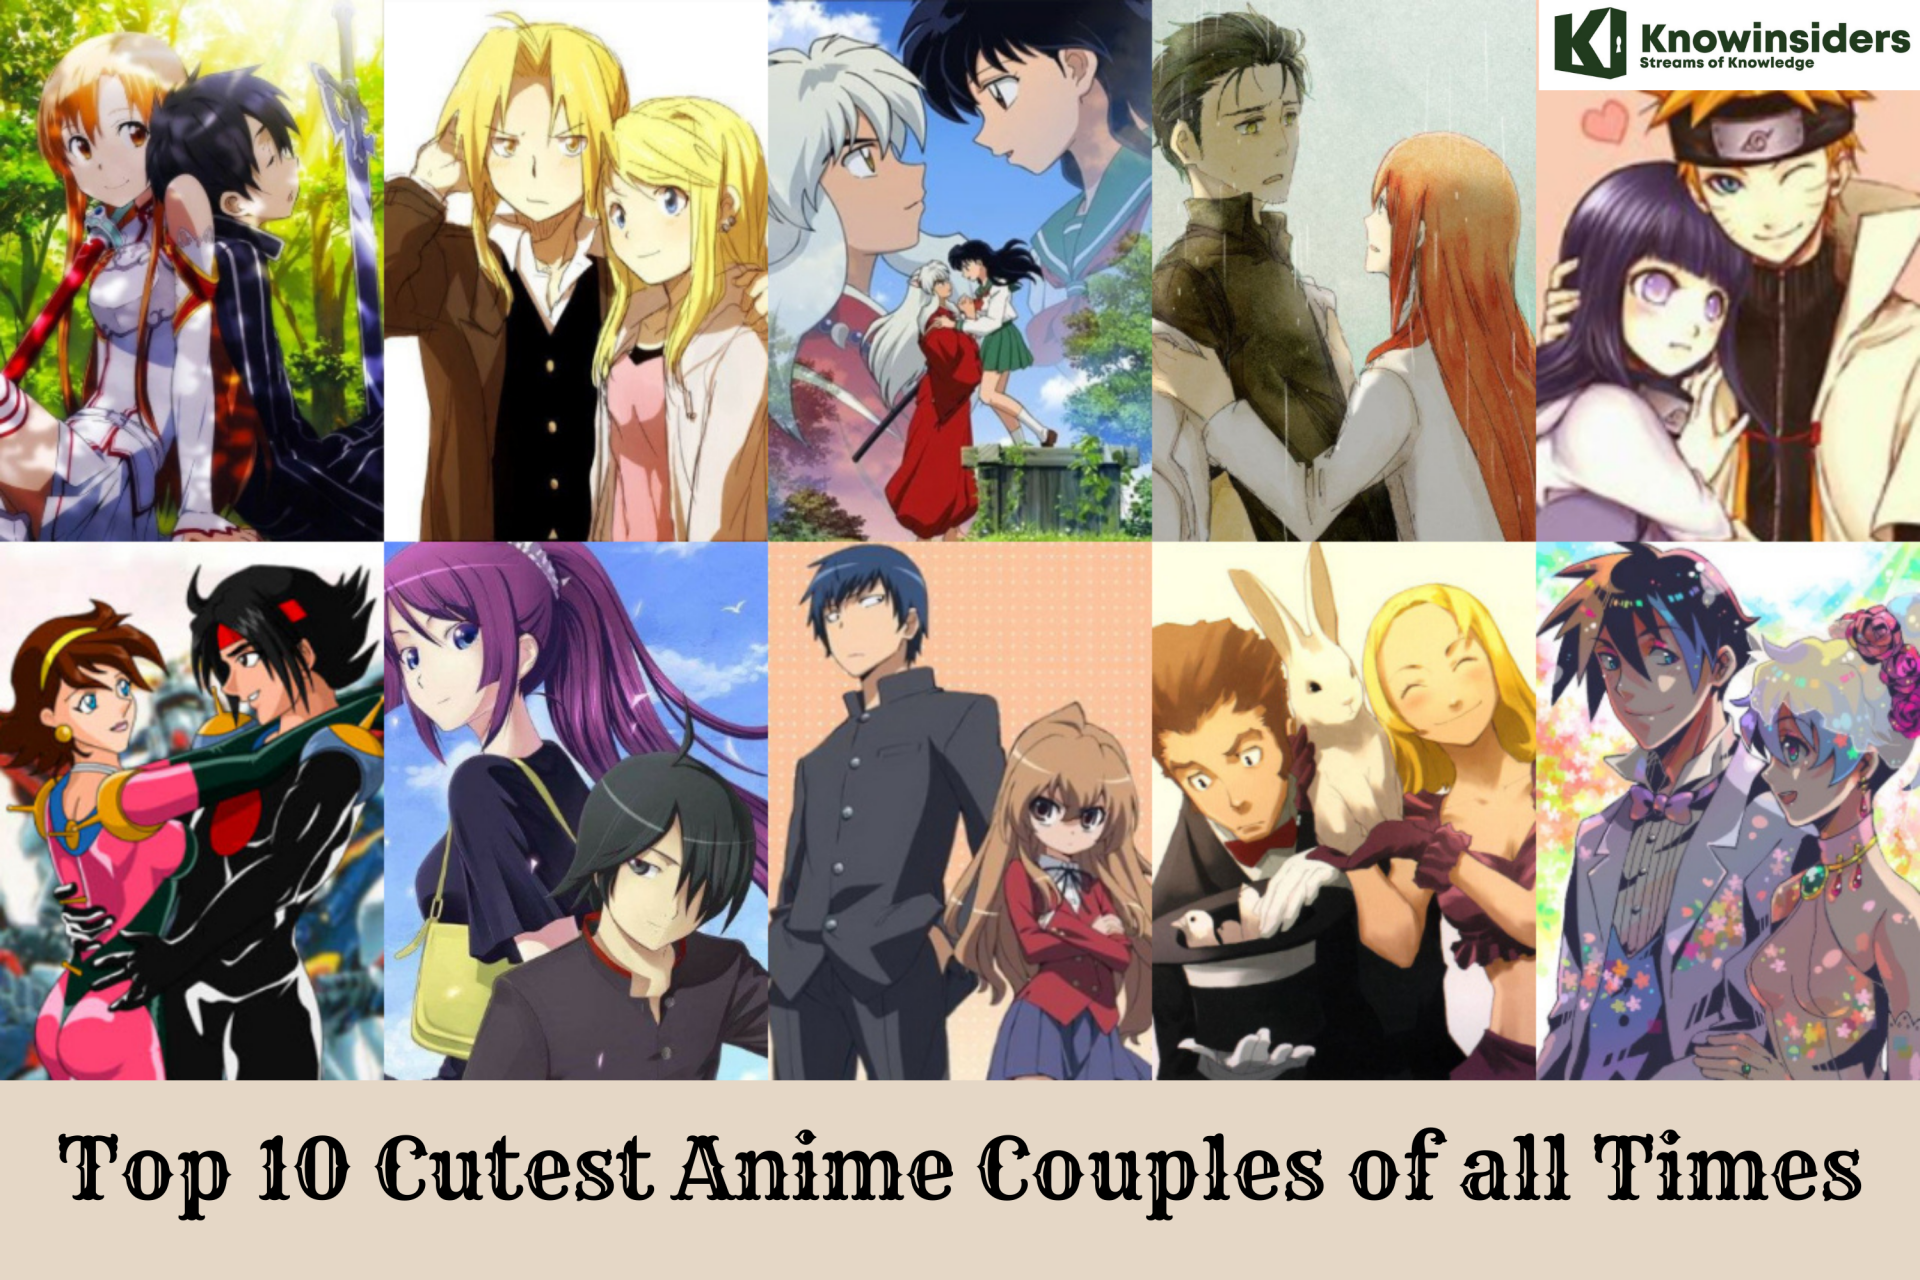 Top 10 Cutest Anime Couples of all Times | KnowInsiders